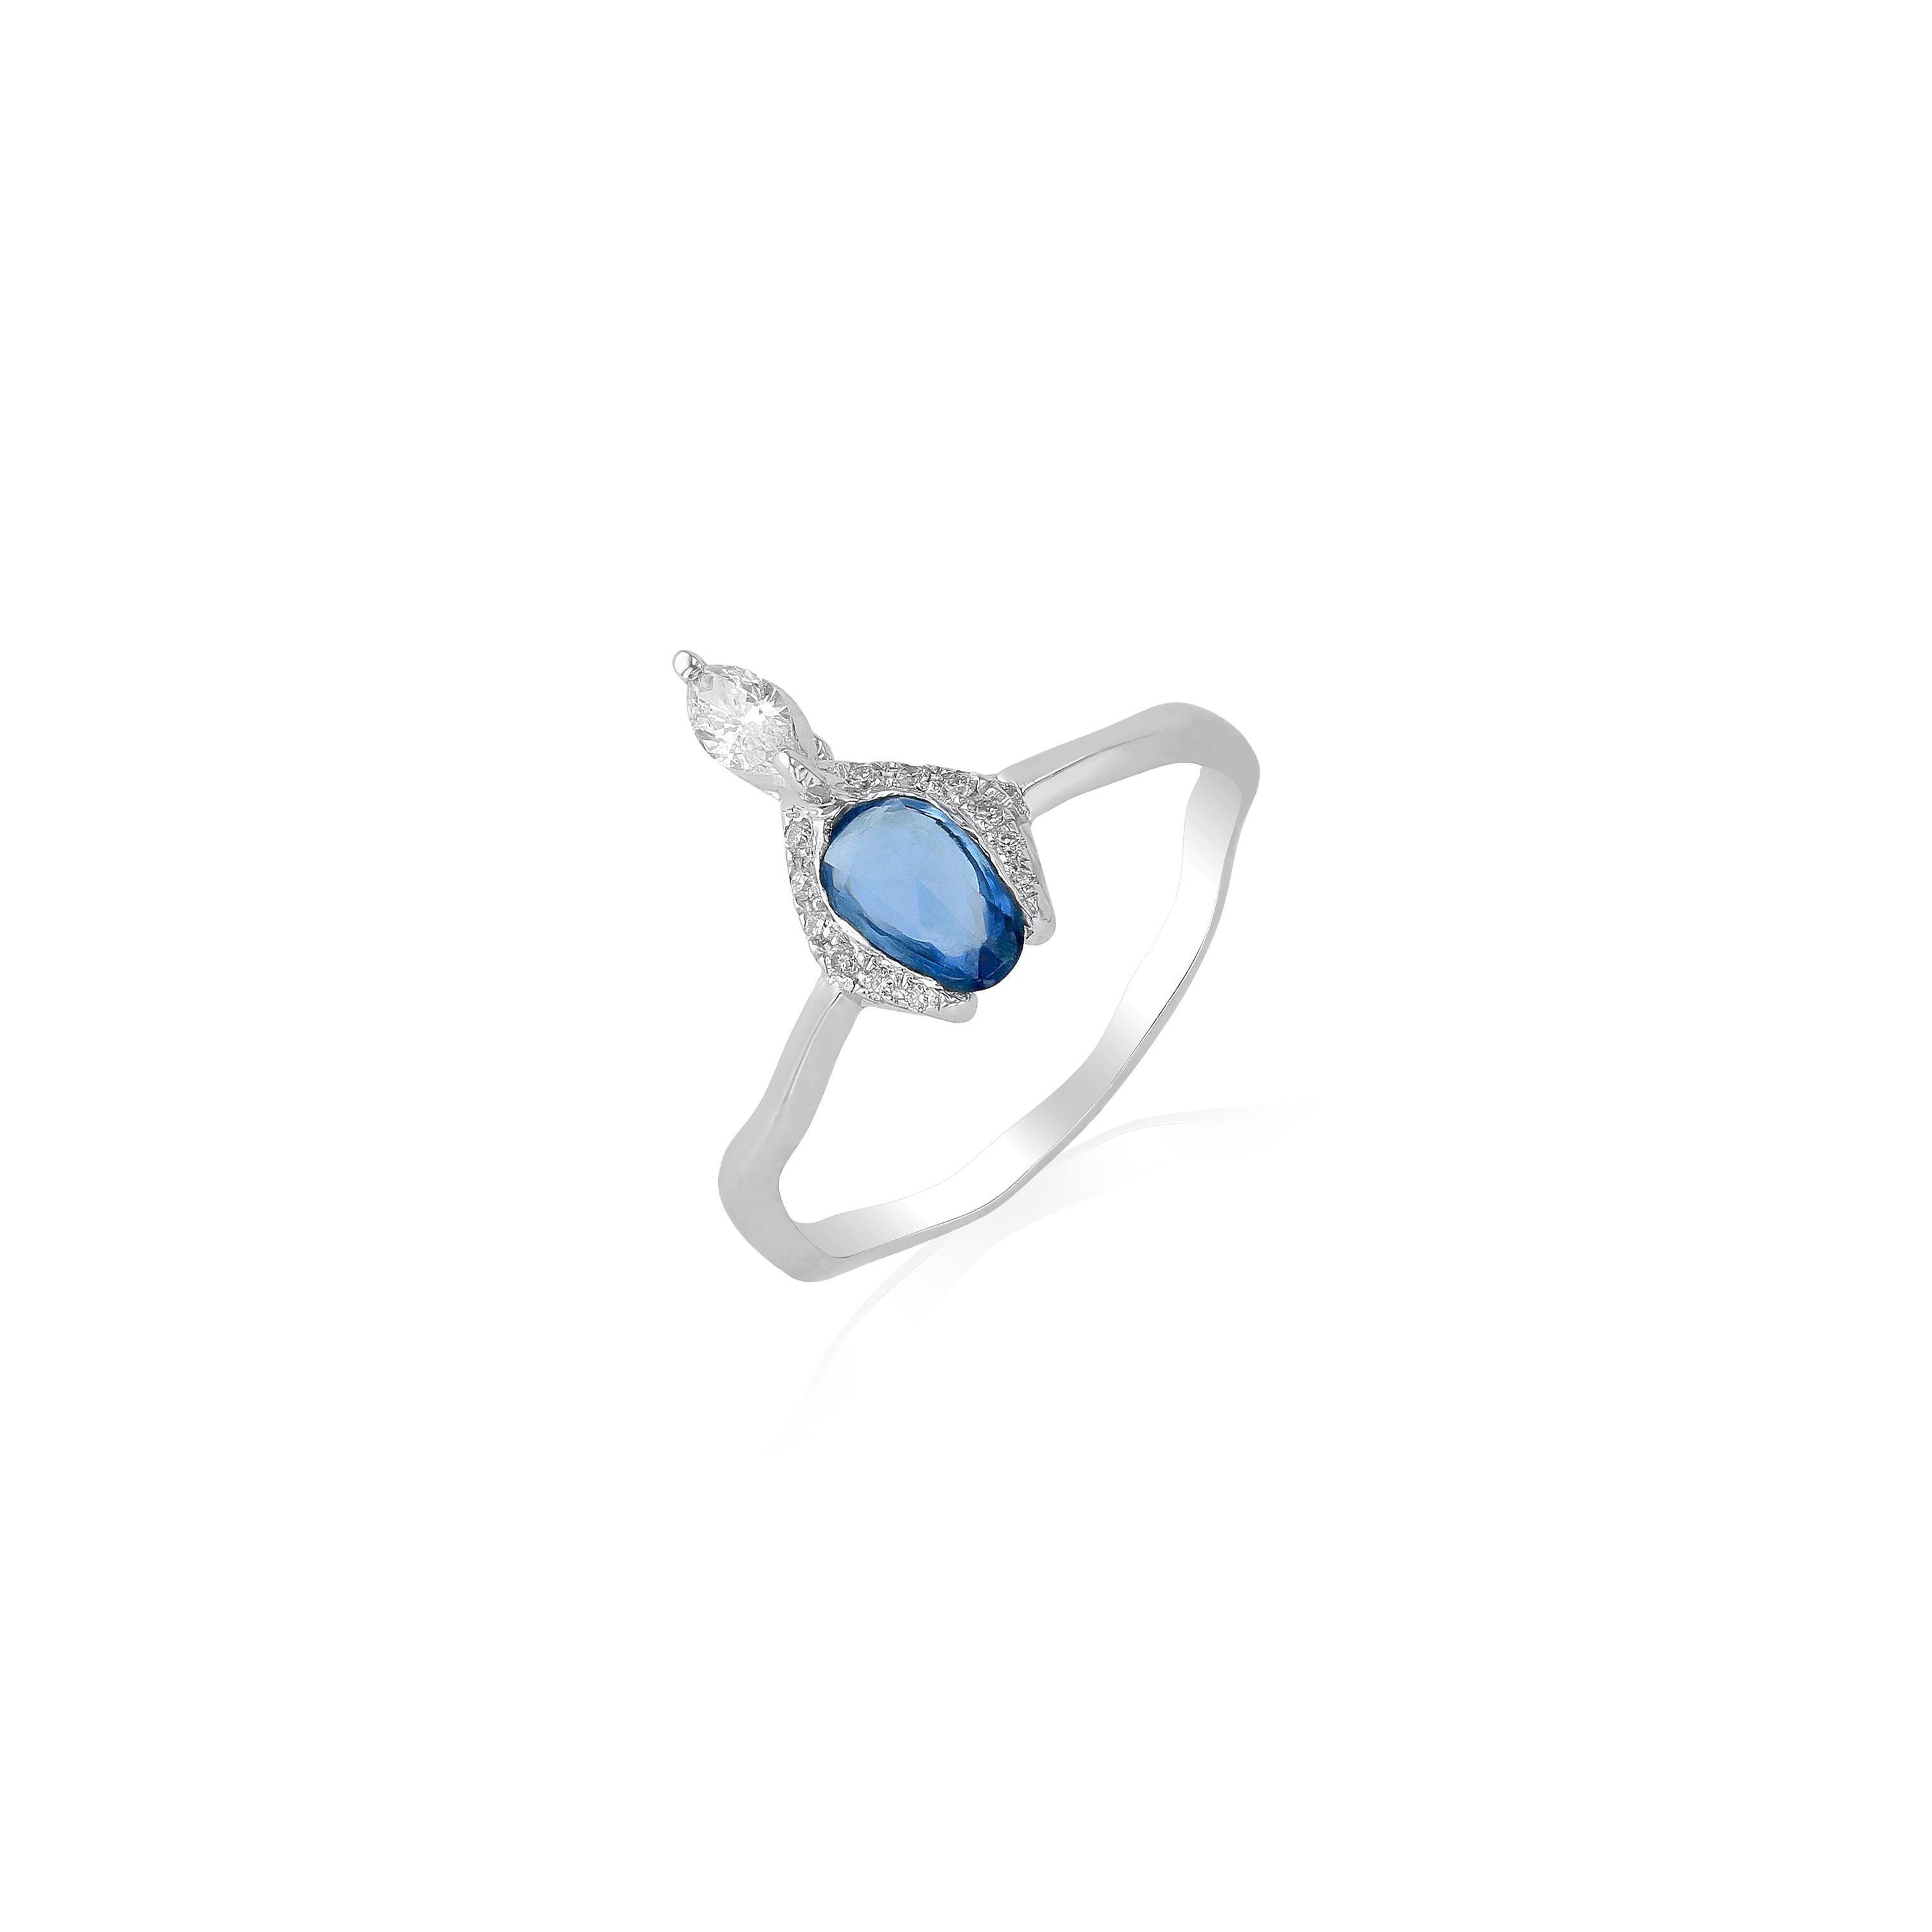 Romantic 18 Karat White Gold Ring with Blue Sapphires 'In Stock' For Sale